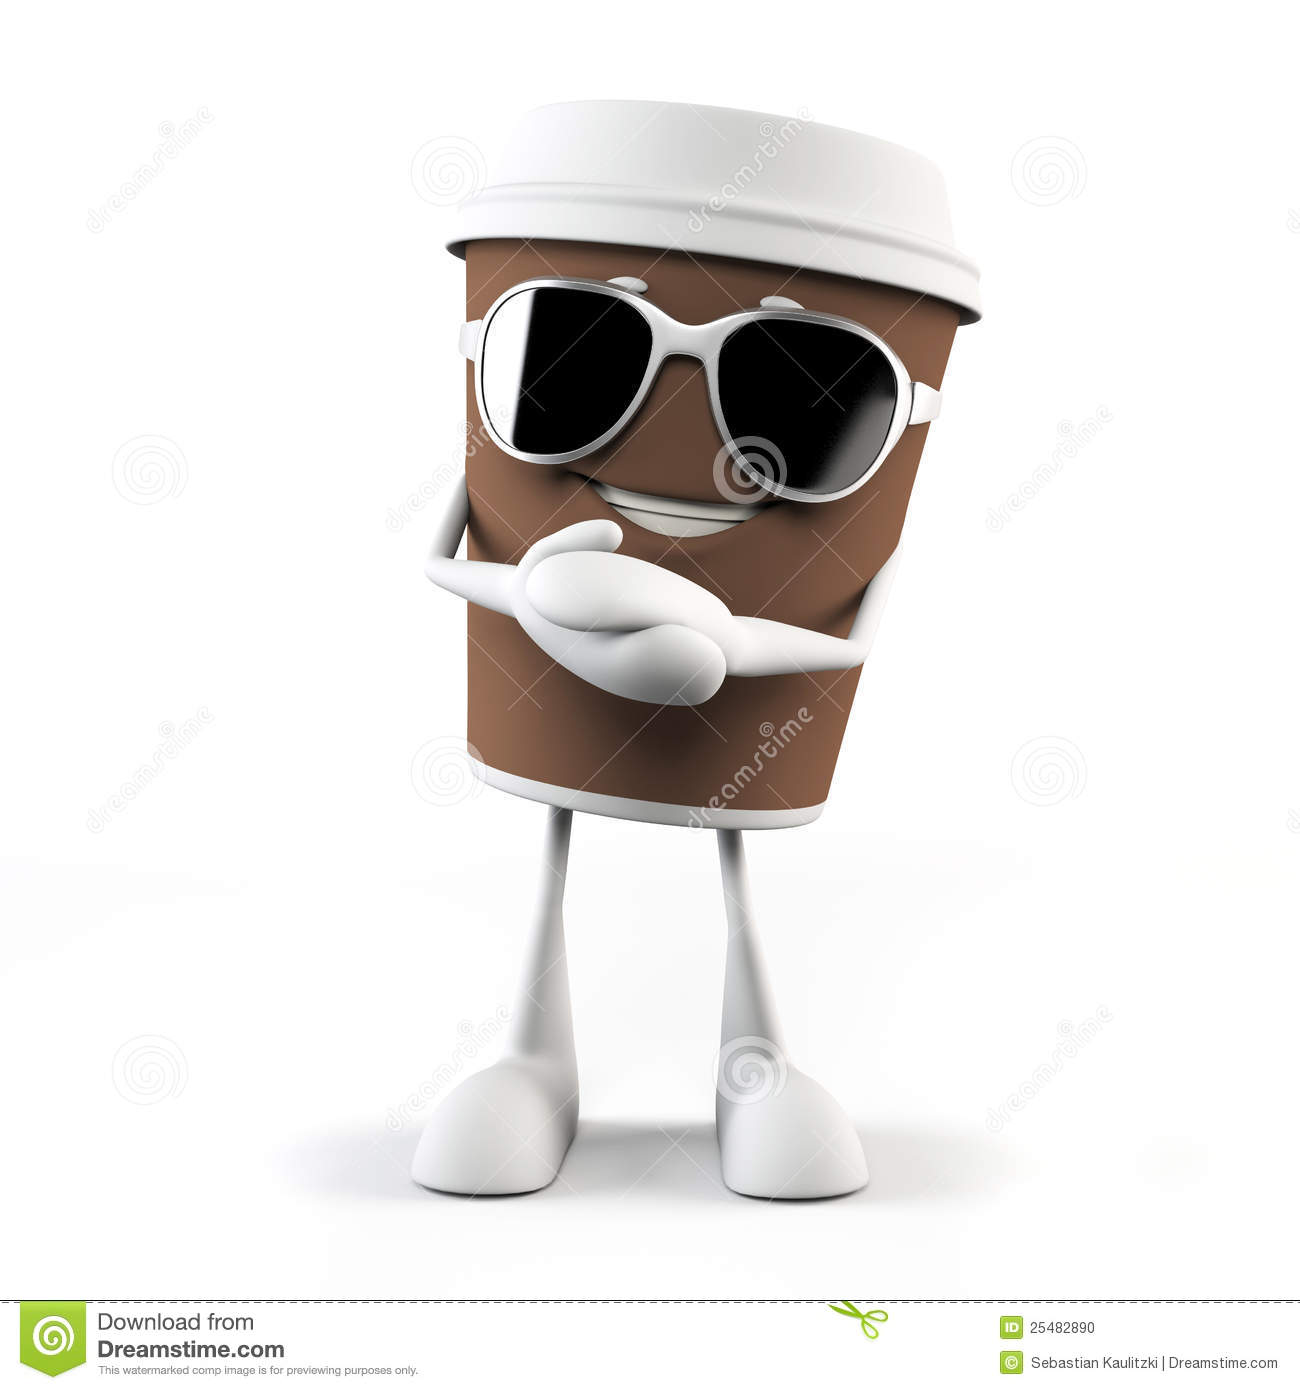 3d Rendered Illustration Of A Coffee Cup Character